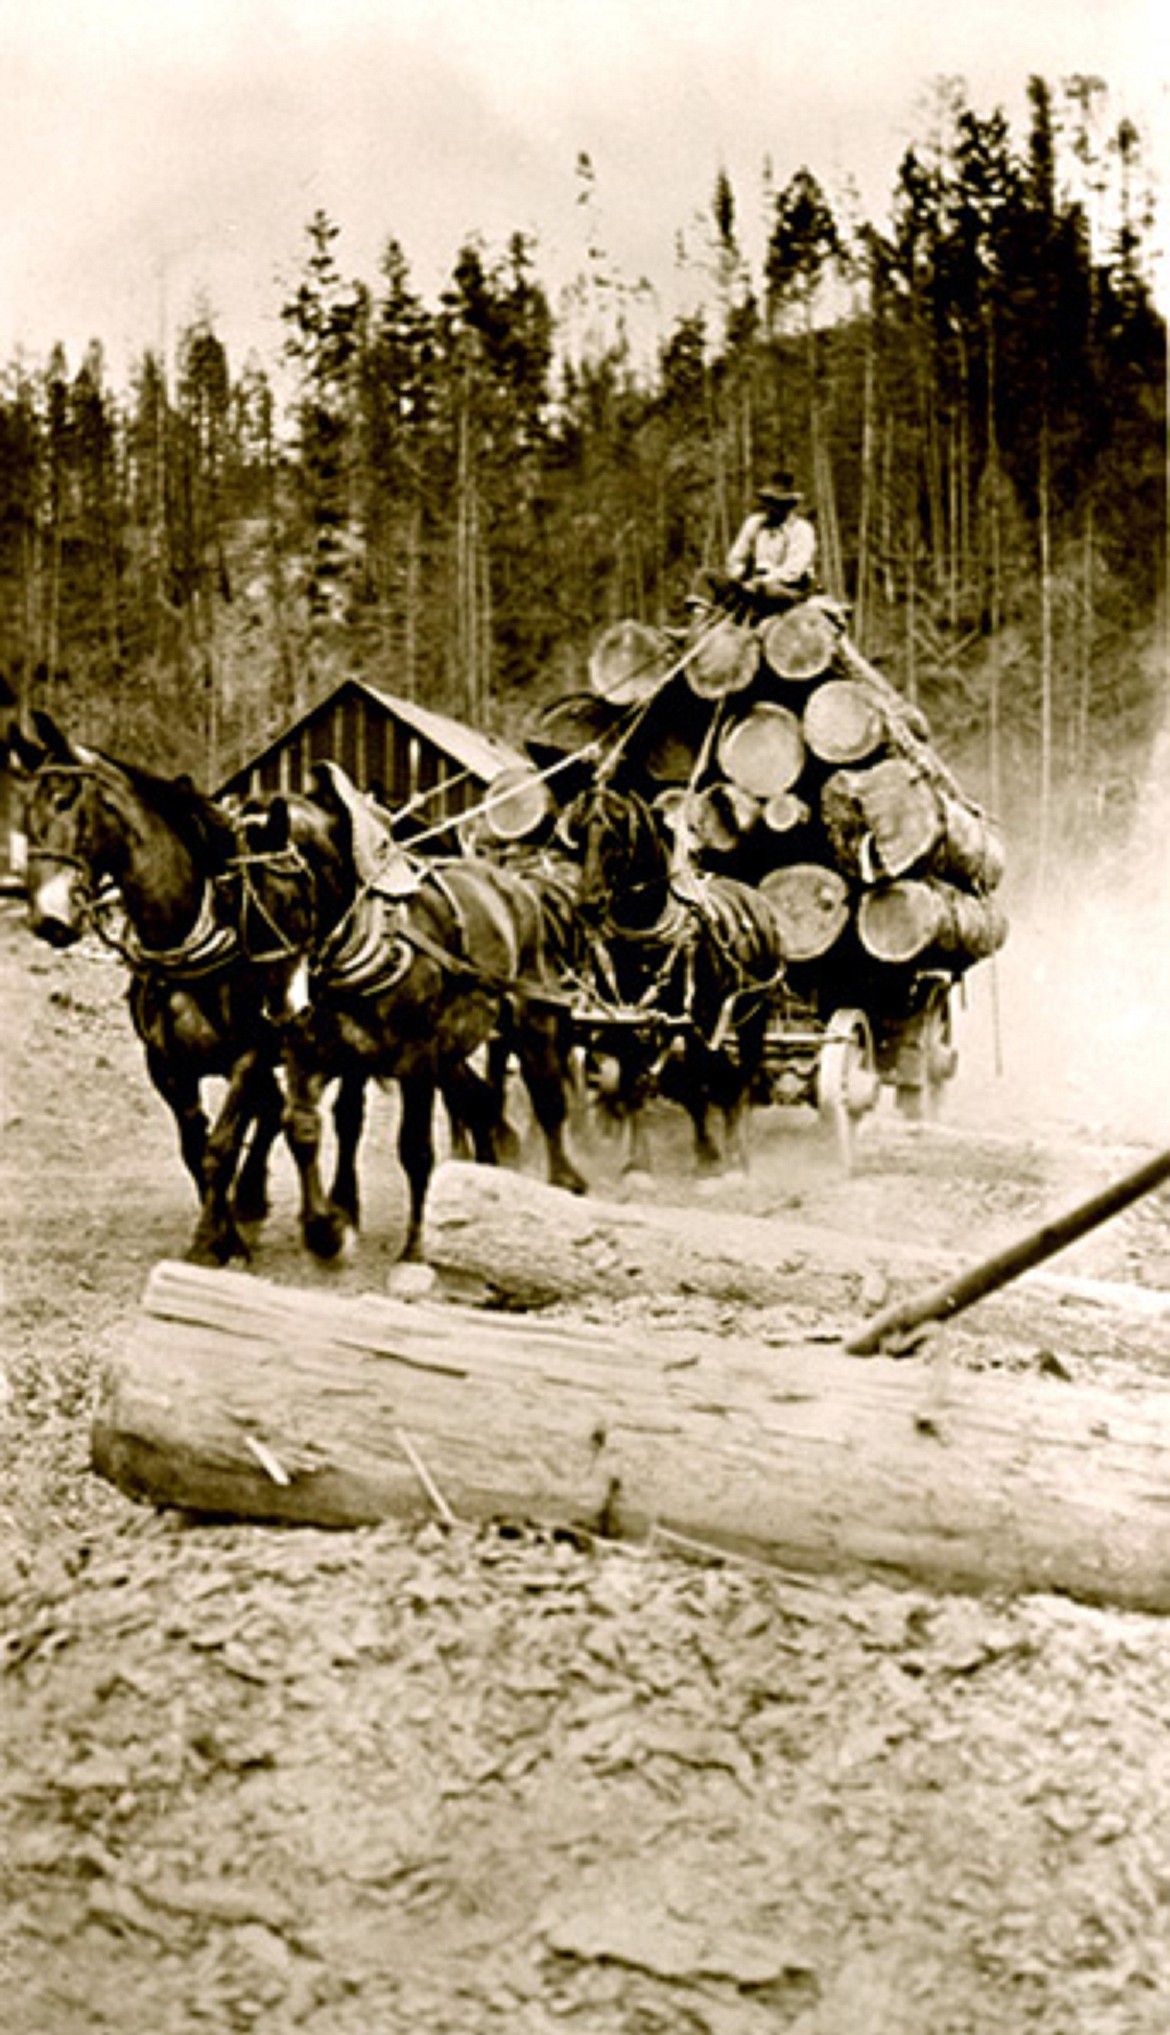 (Photo courtesy PRIEST LAKE HISTORY MUSEUM)
The history of early logging in Priest Lake was the first of four presentations in the Priest Lake Heritage Series, hosted by the Priest Lake Museum in the Coolin Civic Center last Wednesday.